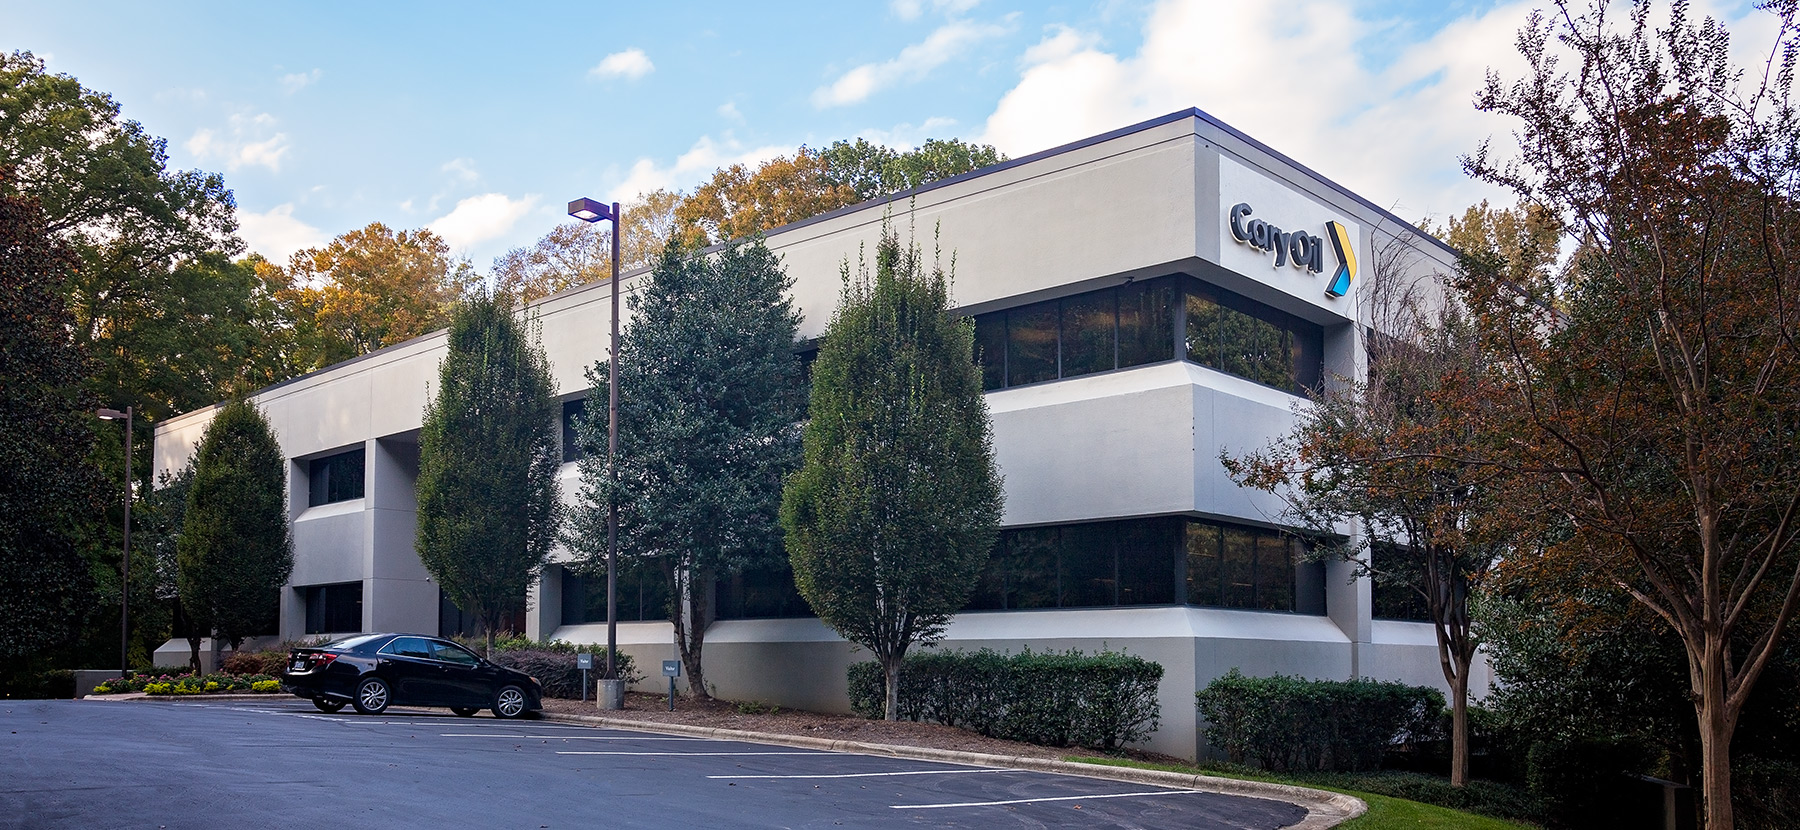 Cary Oil Headquarters